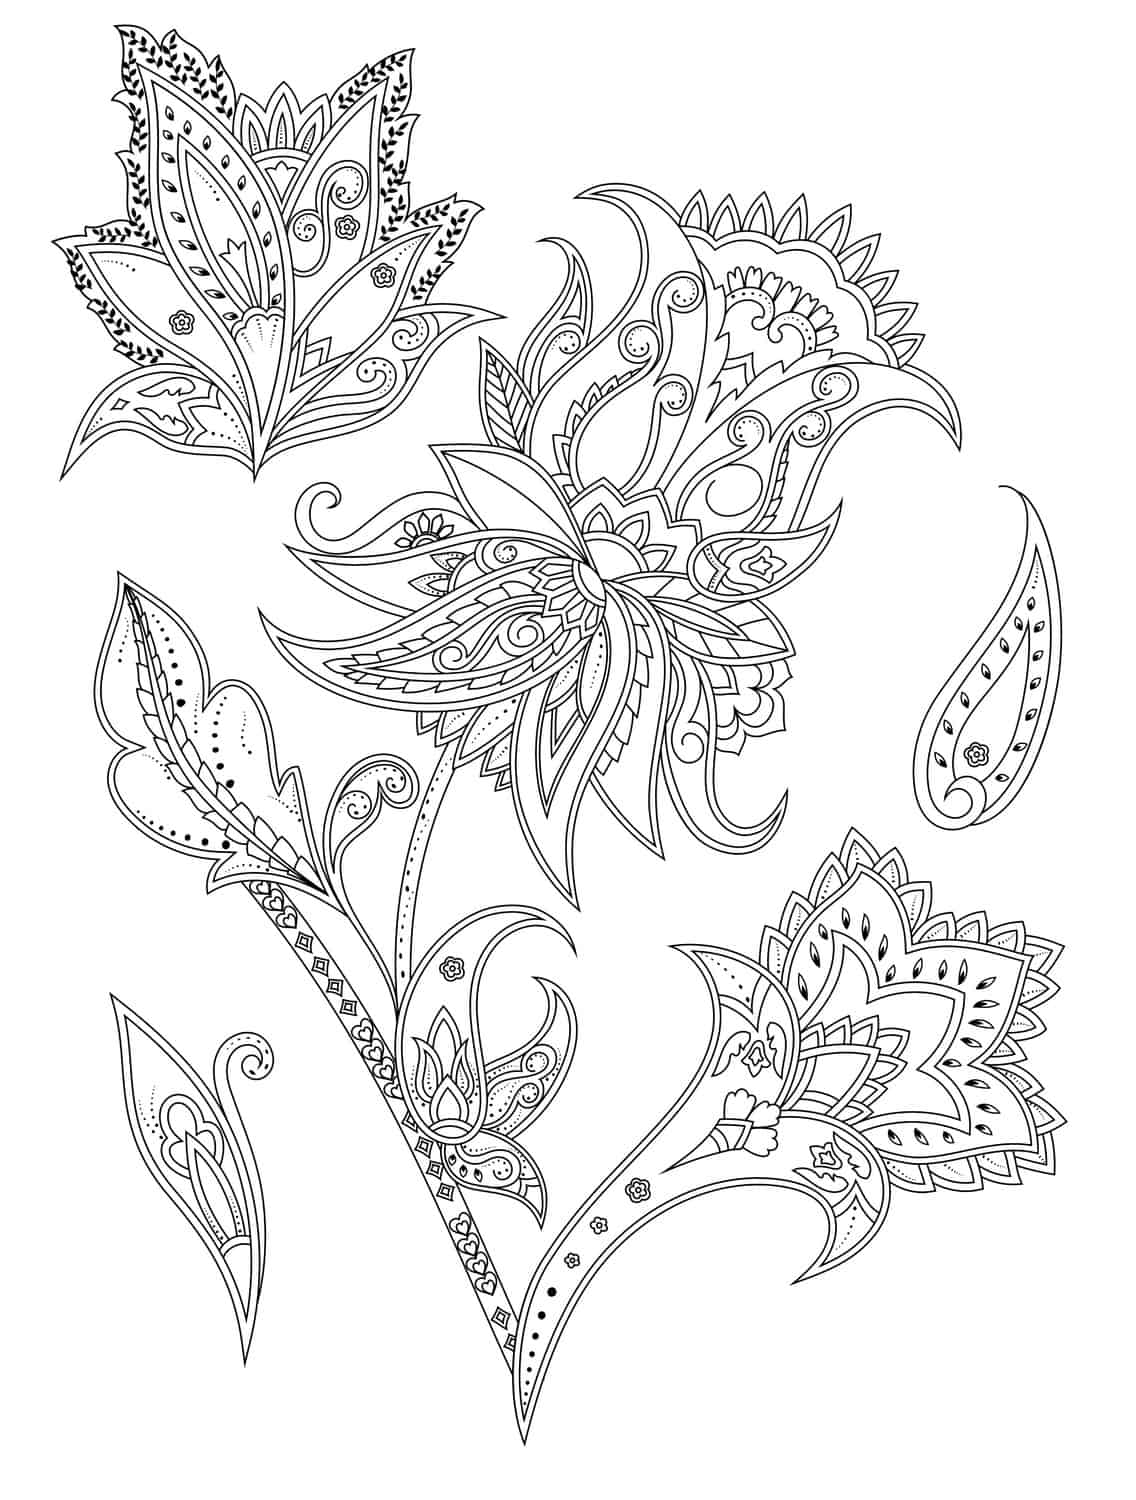 20 Gorgeous Free Printable Adult Coloring Pages   Page 20 of 20 ...